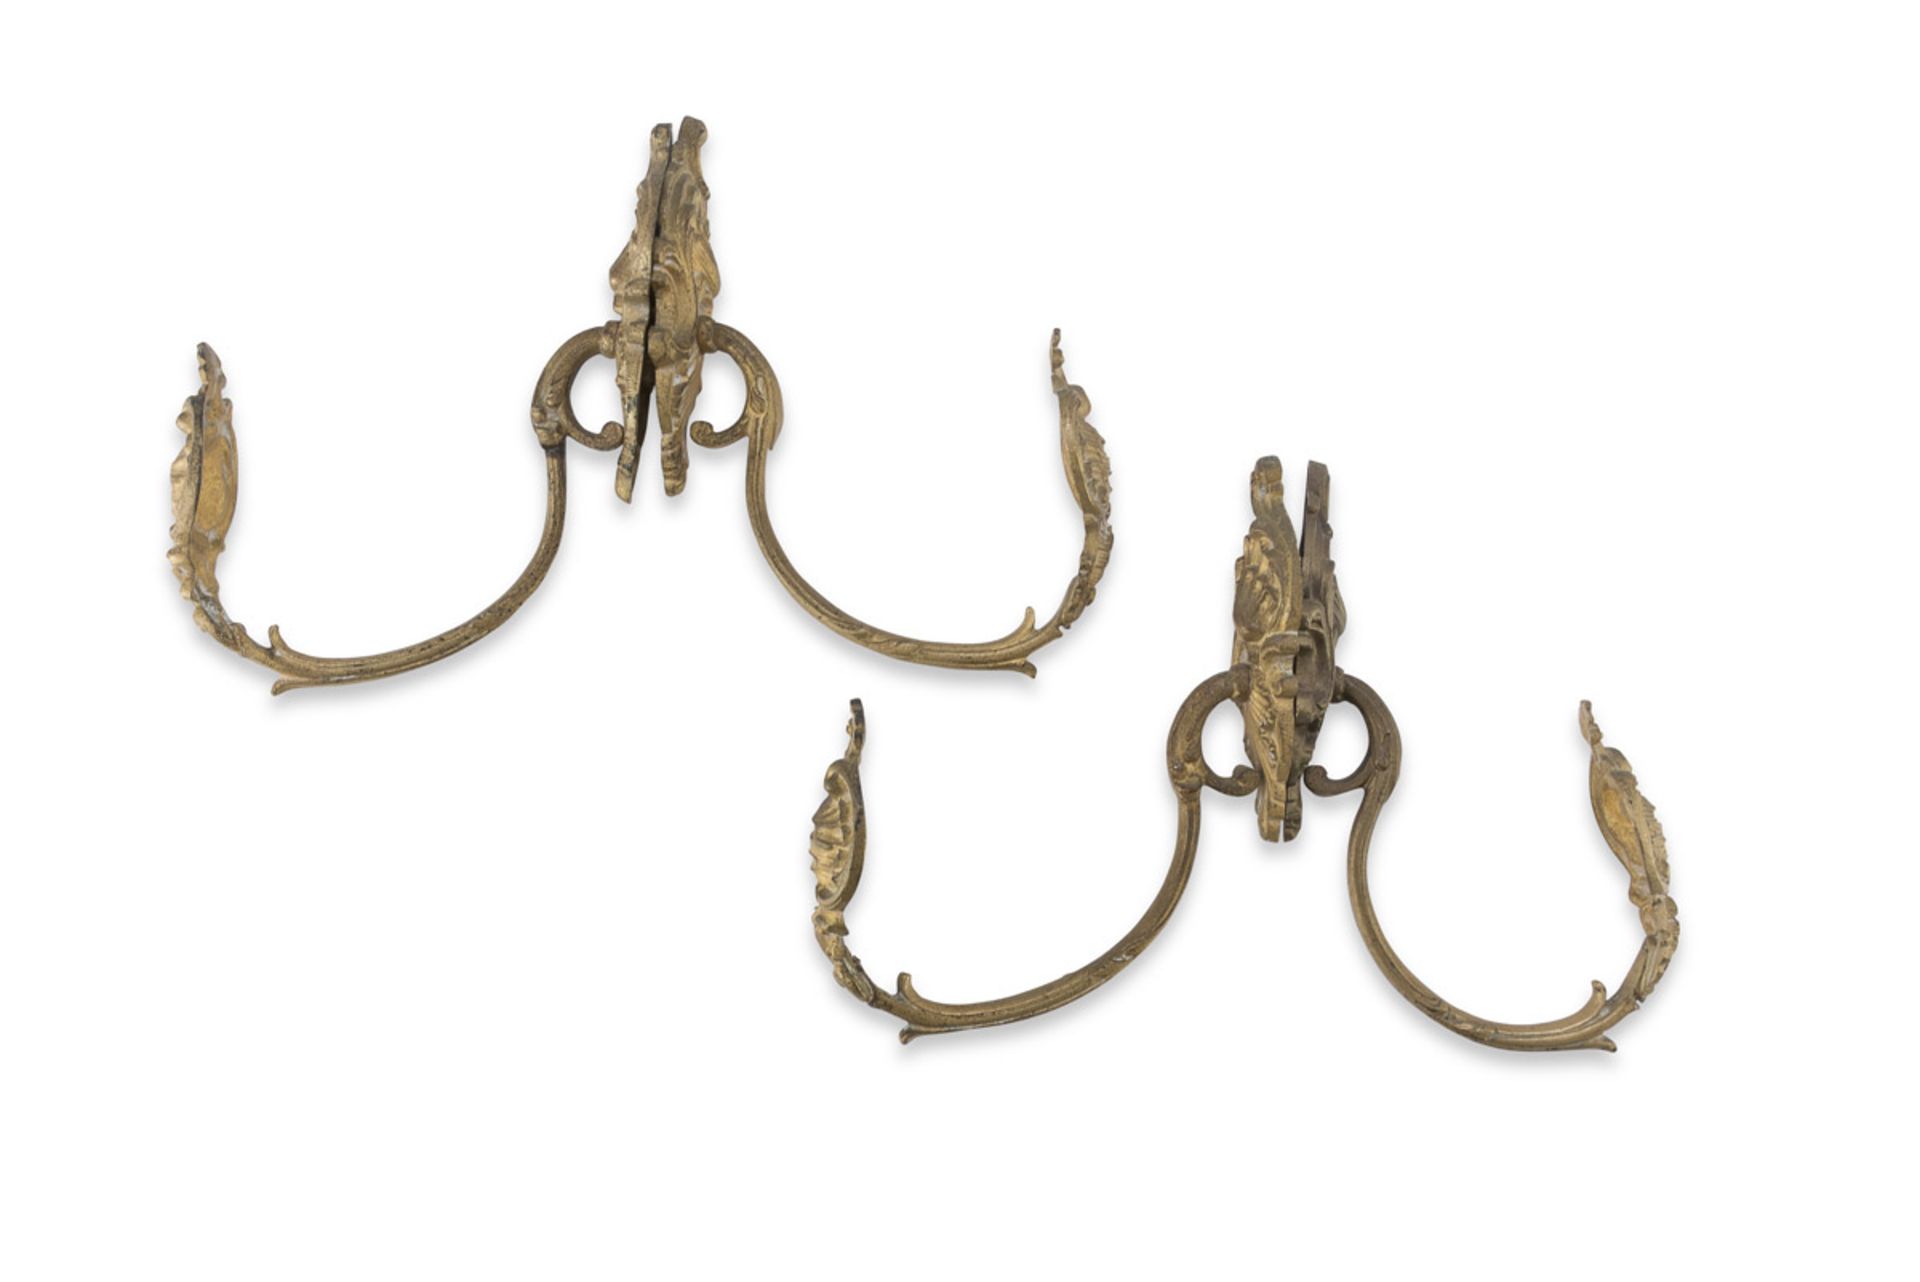 TWO PAIRS OF CURTAIN RODS - 19TH CENTURY